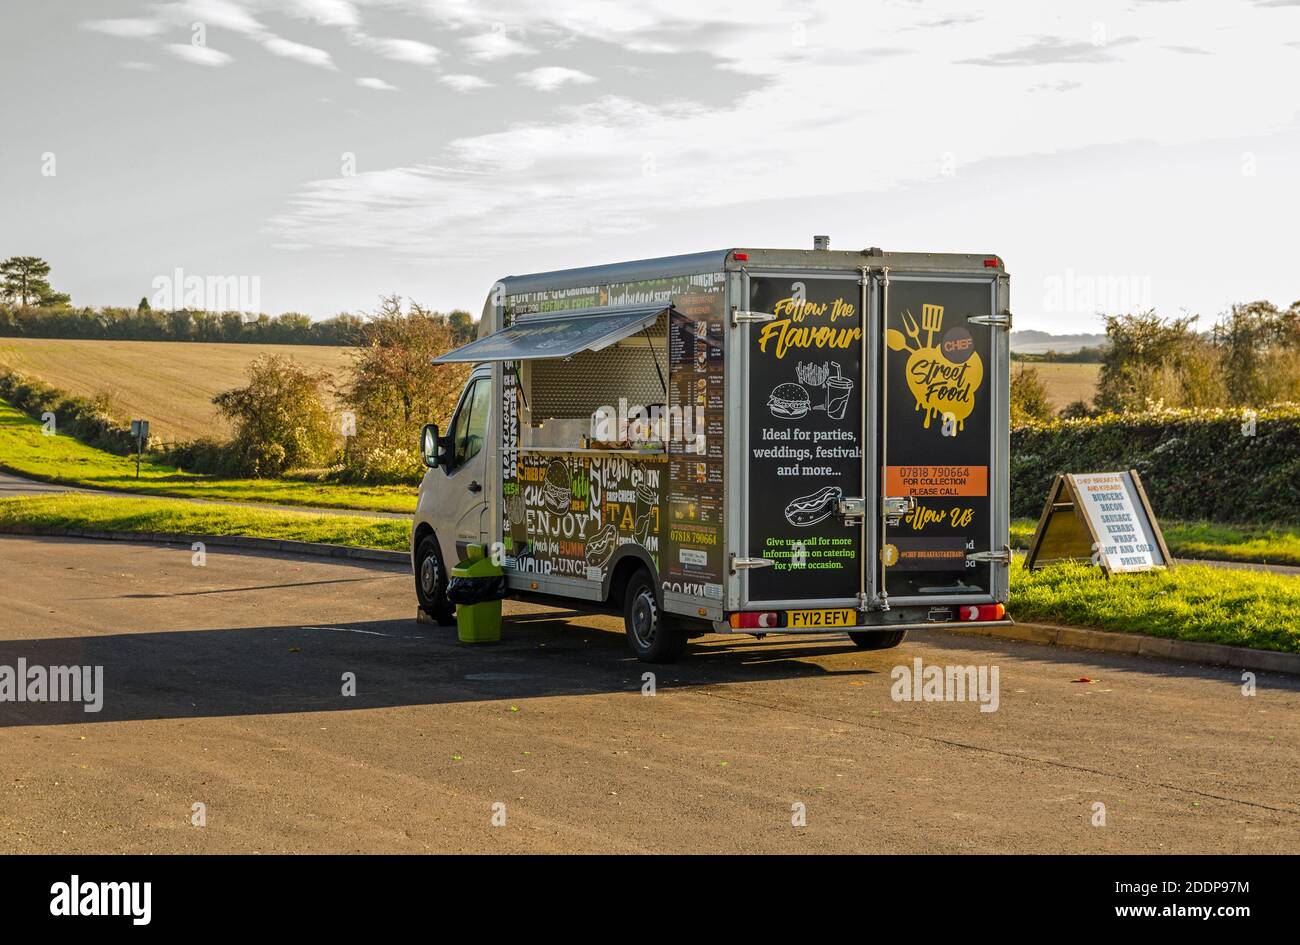 Basingstoke, UK - November 17, 2020: A kebab van parked in a lay by overlooking glorious countryside on the A339 main road in Basingstoke, Hampshire o Stock Photo